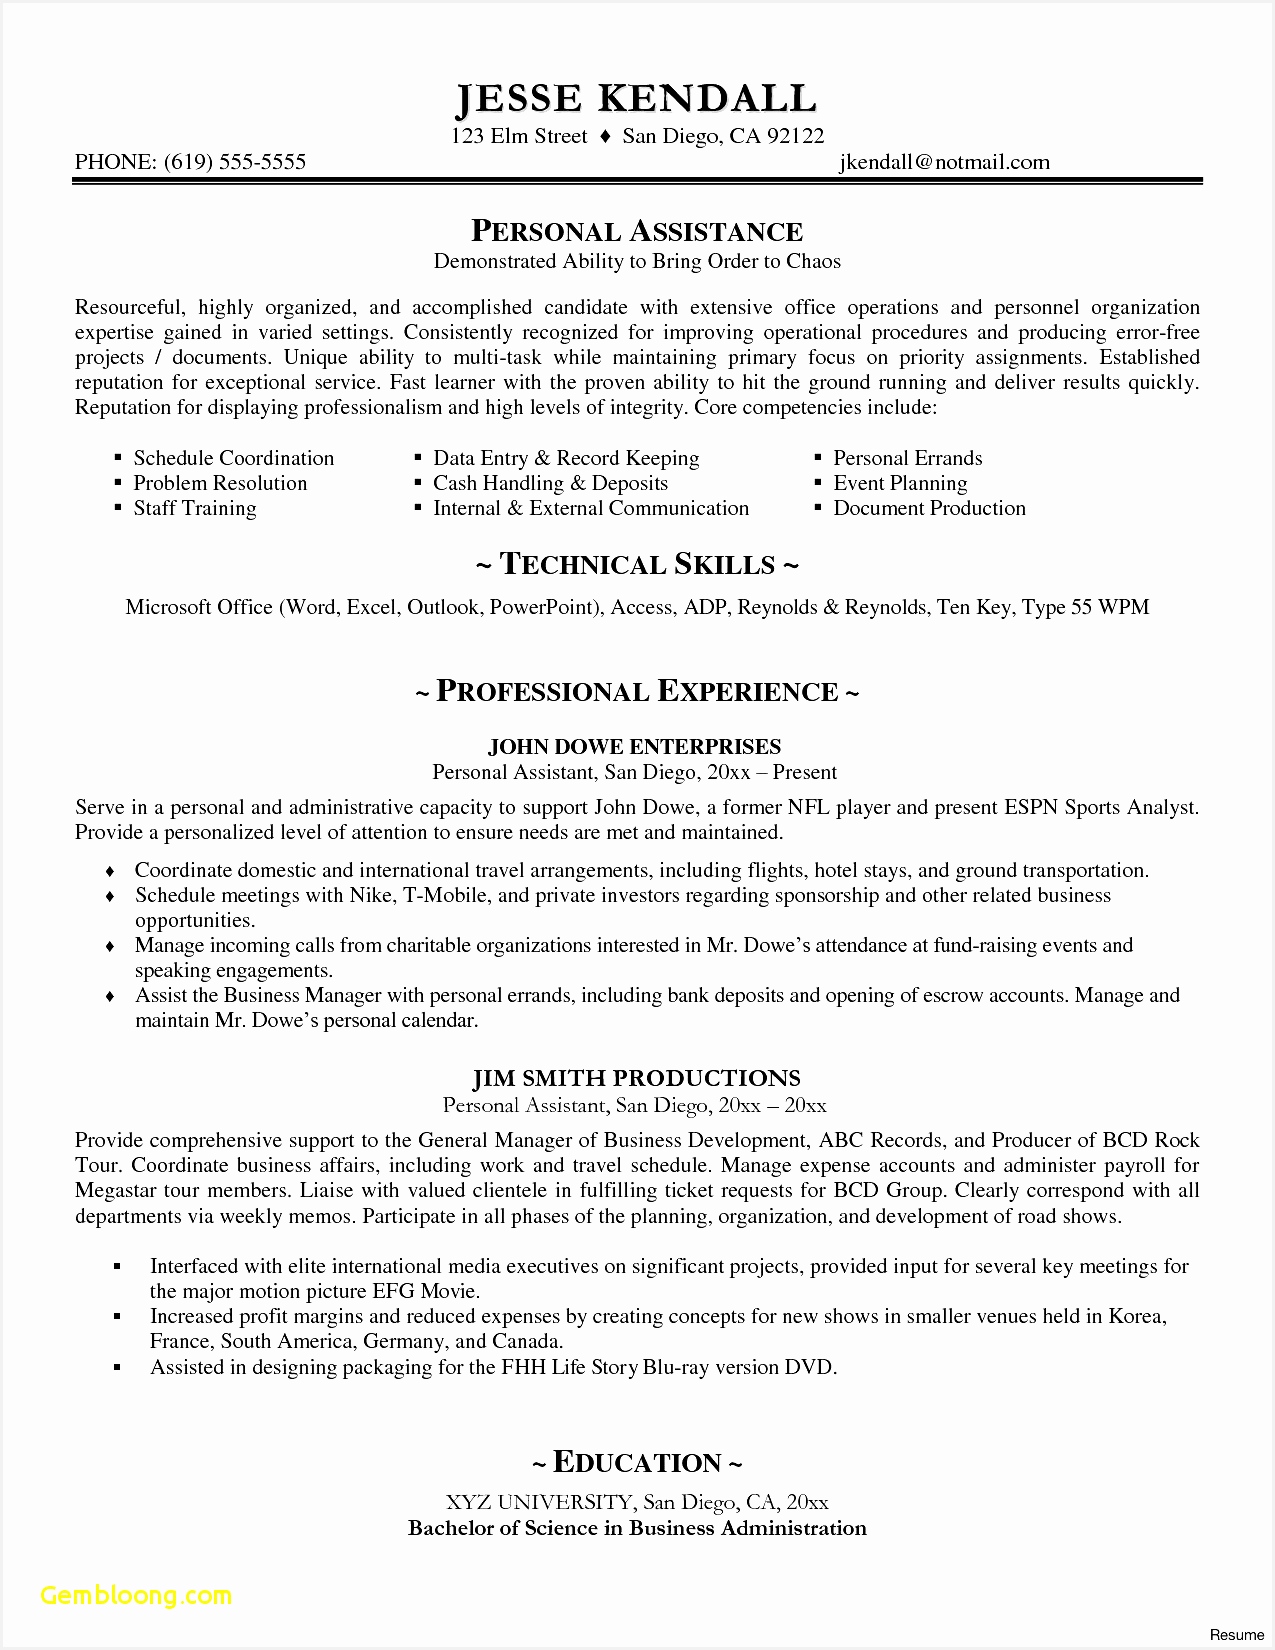 Free Resume Templates for Word Fresh Resume Template Doc Free Download Executive Resume Templates Word Od16501275